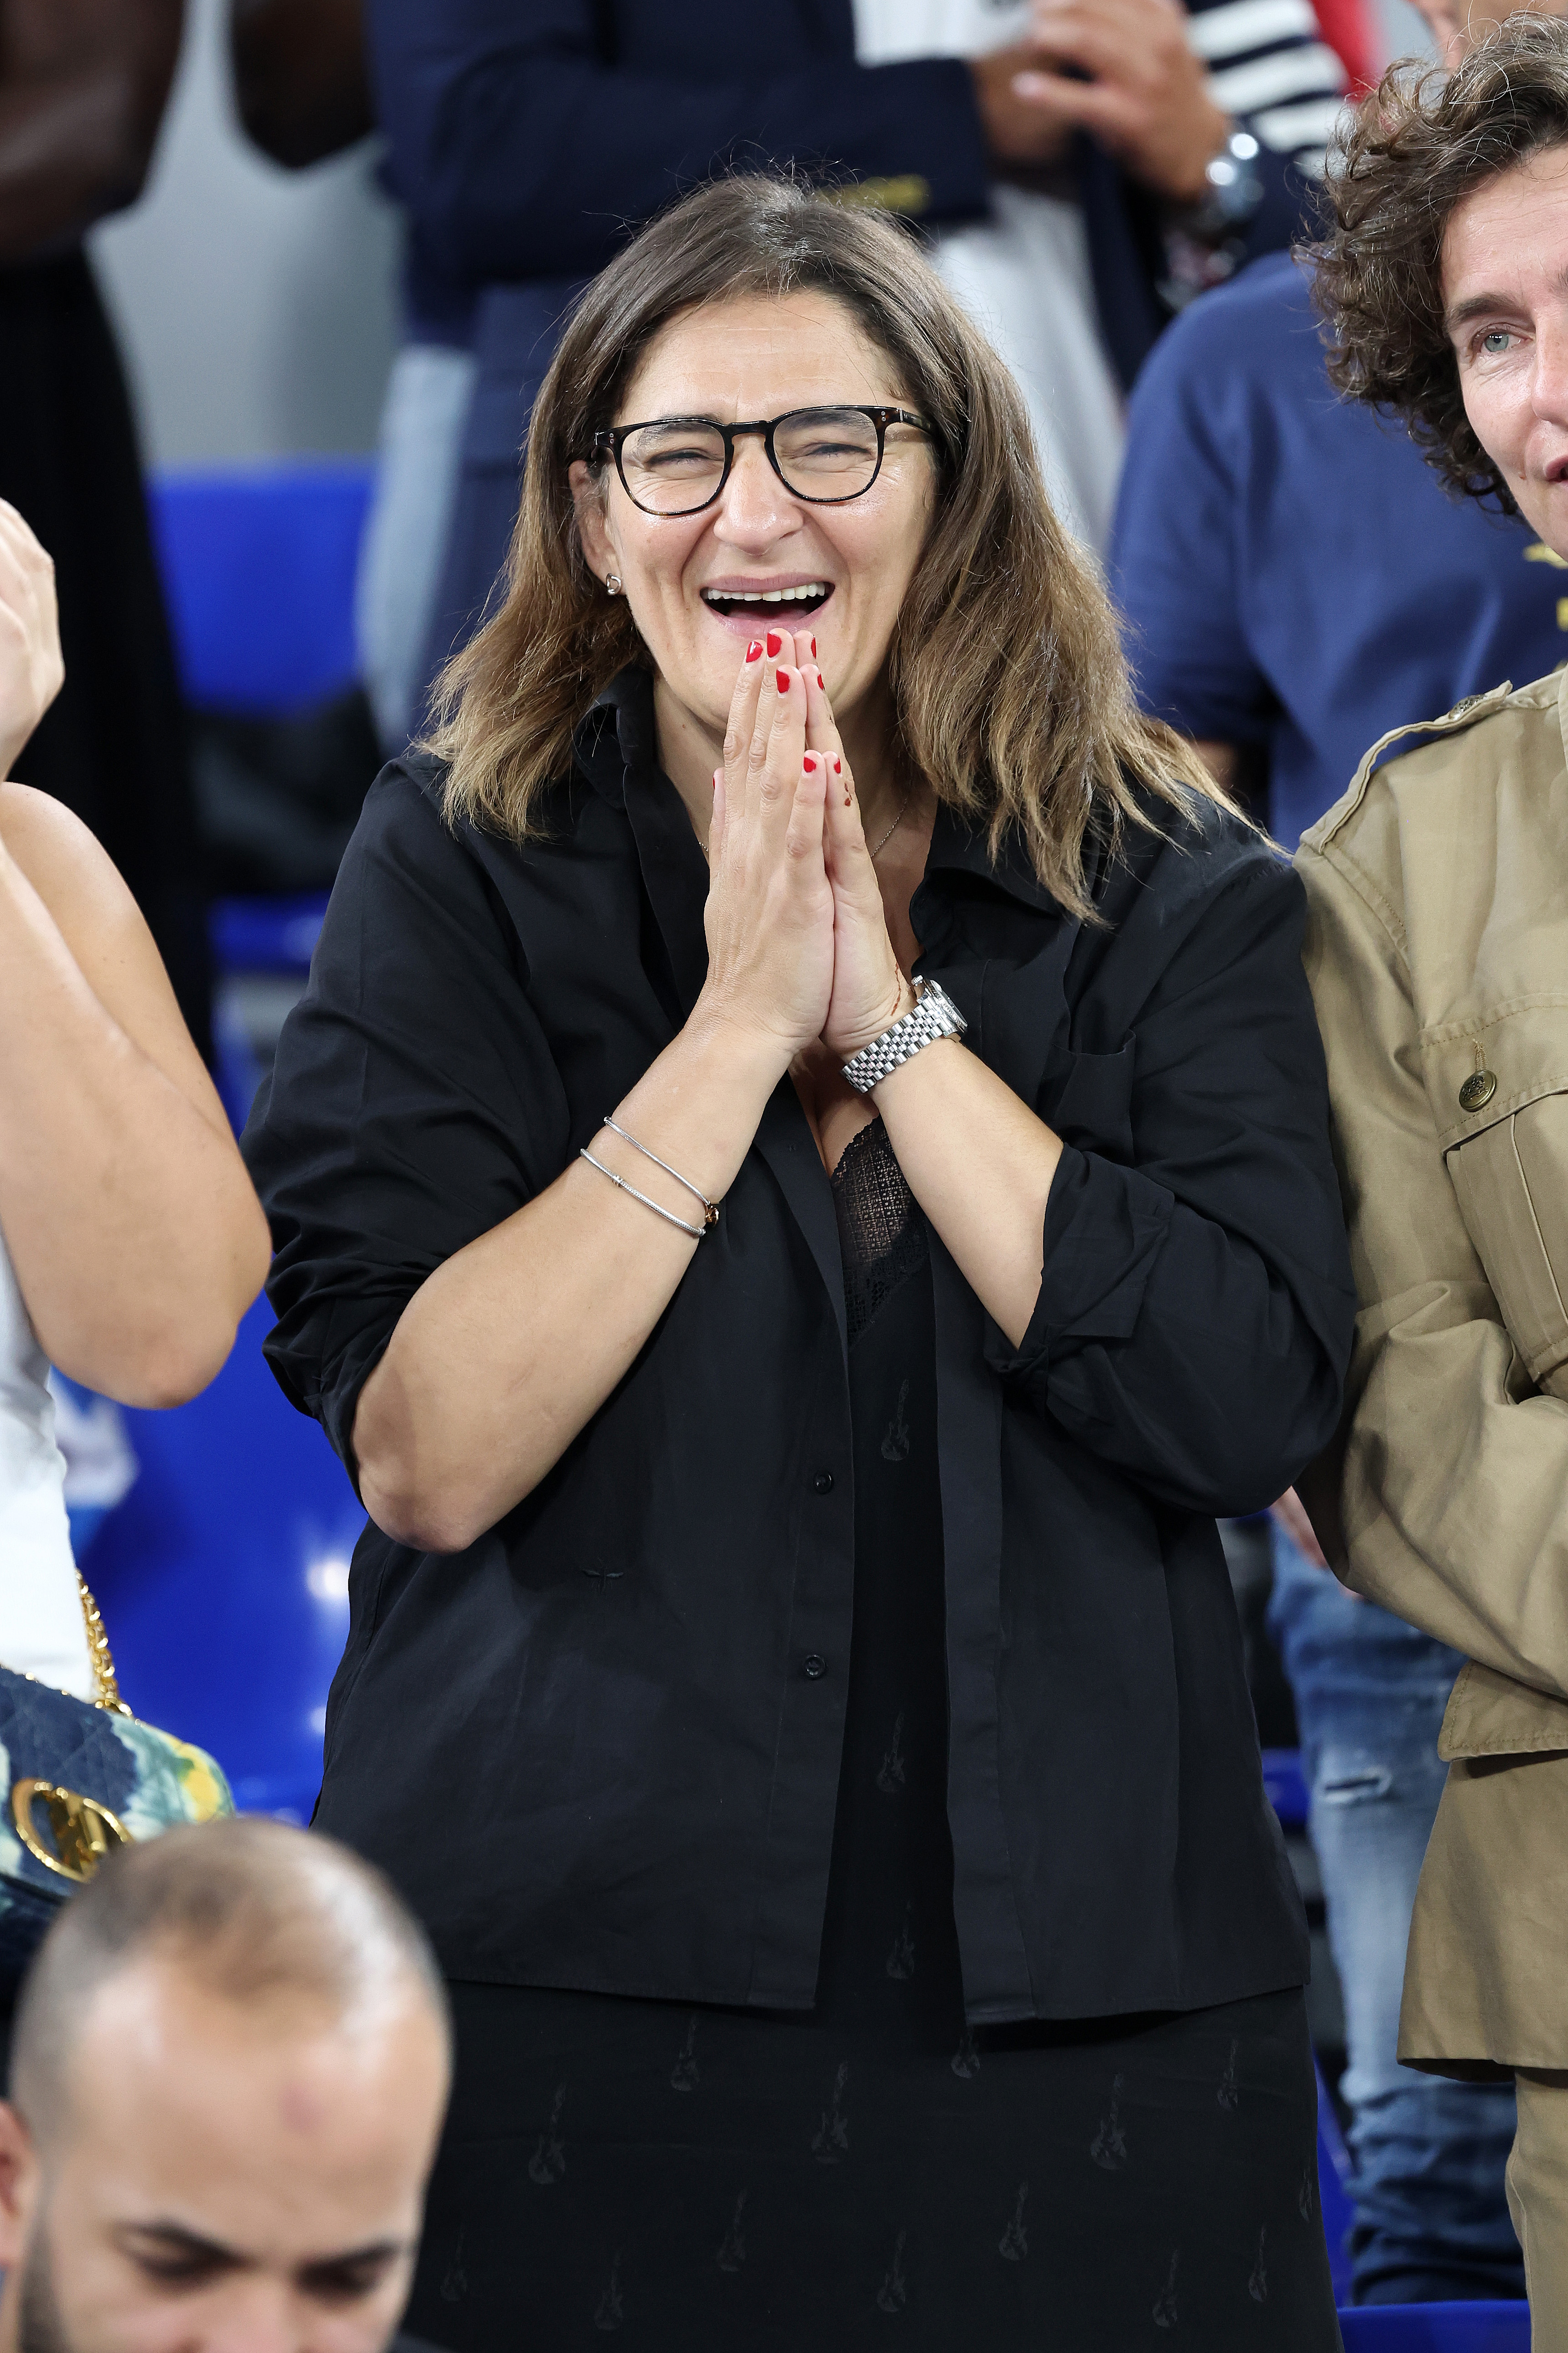 Fayza Lamari at the FIFA World Cup Qatar 2022 Group D match between France and Denmark on November 26, 2022, in Doha, Qatar. | Source: Getty Images